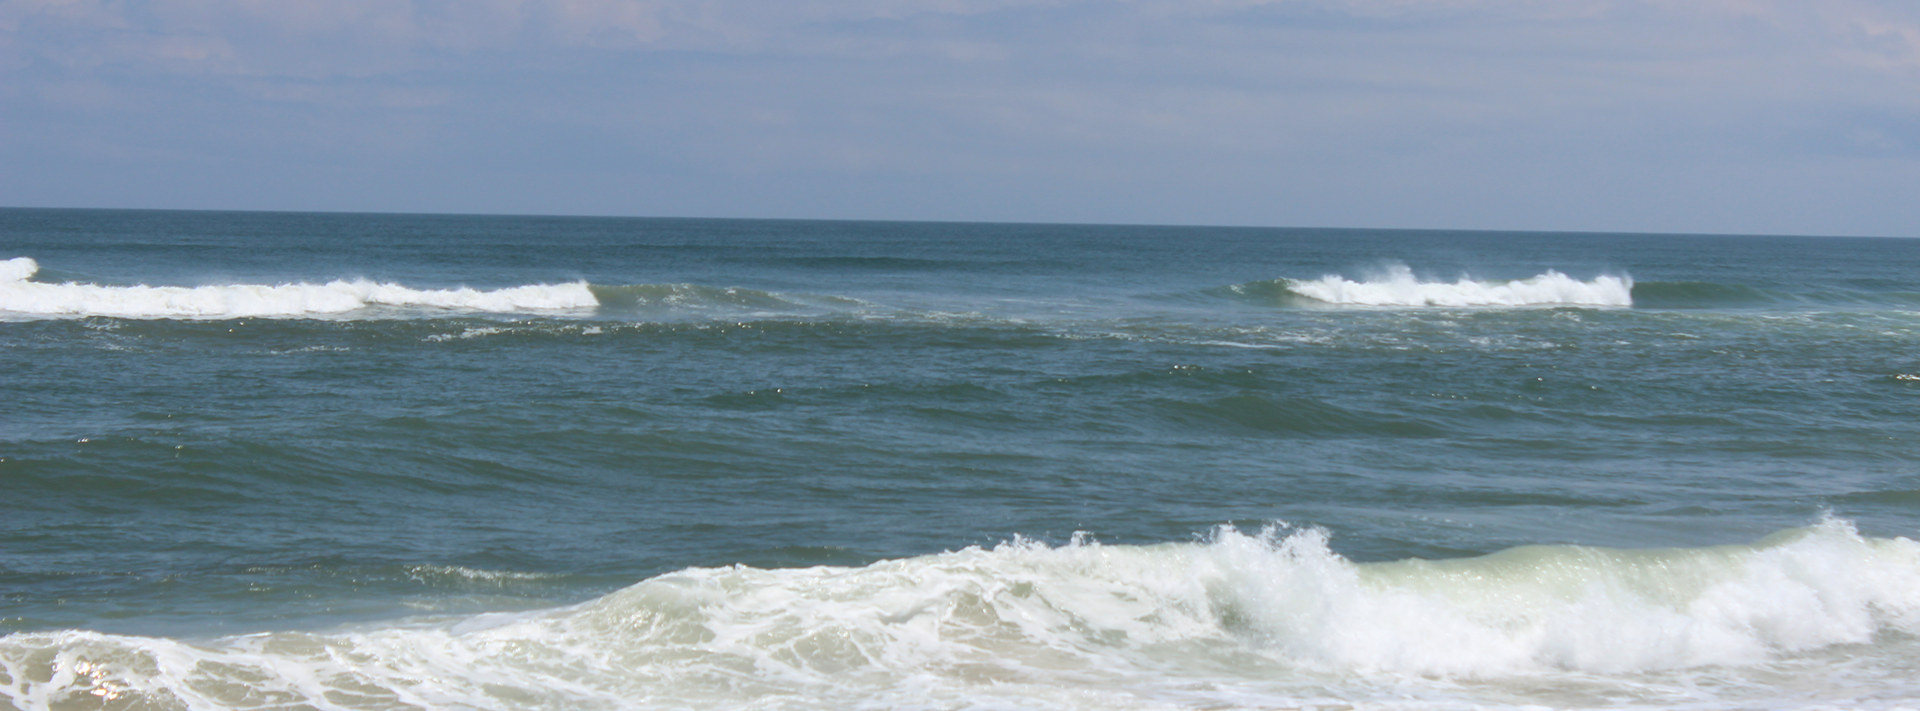 A rip current is pictured.